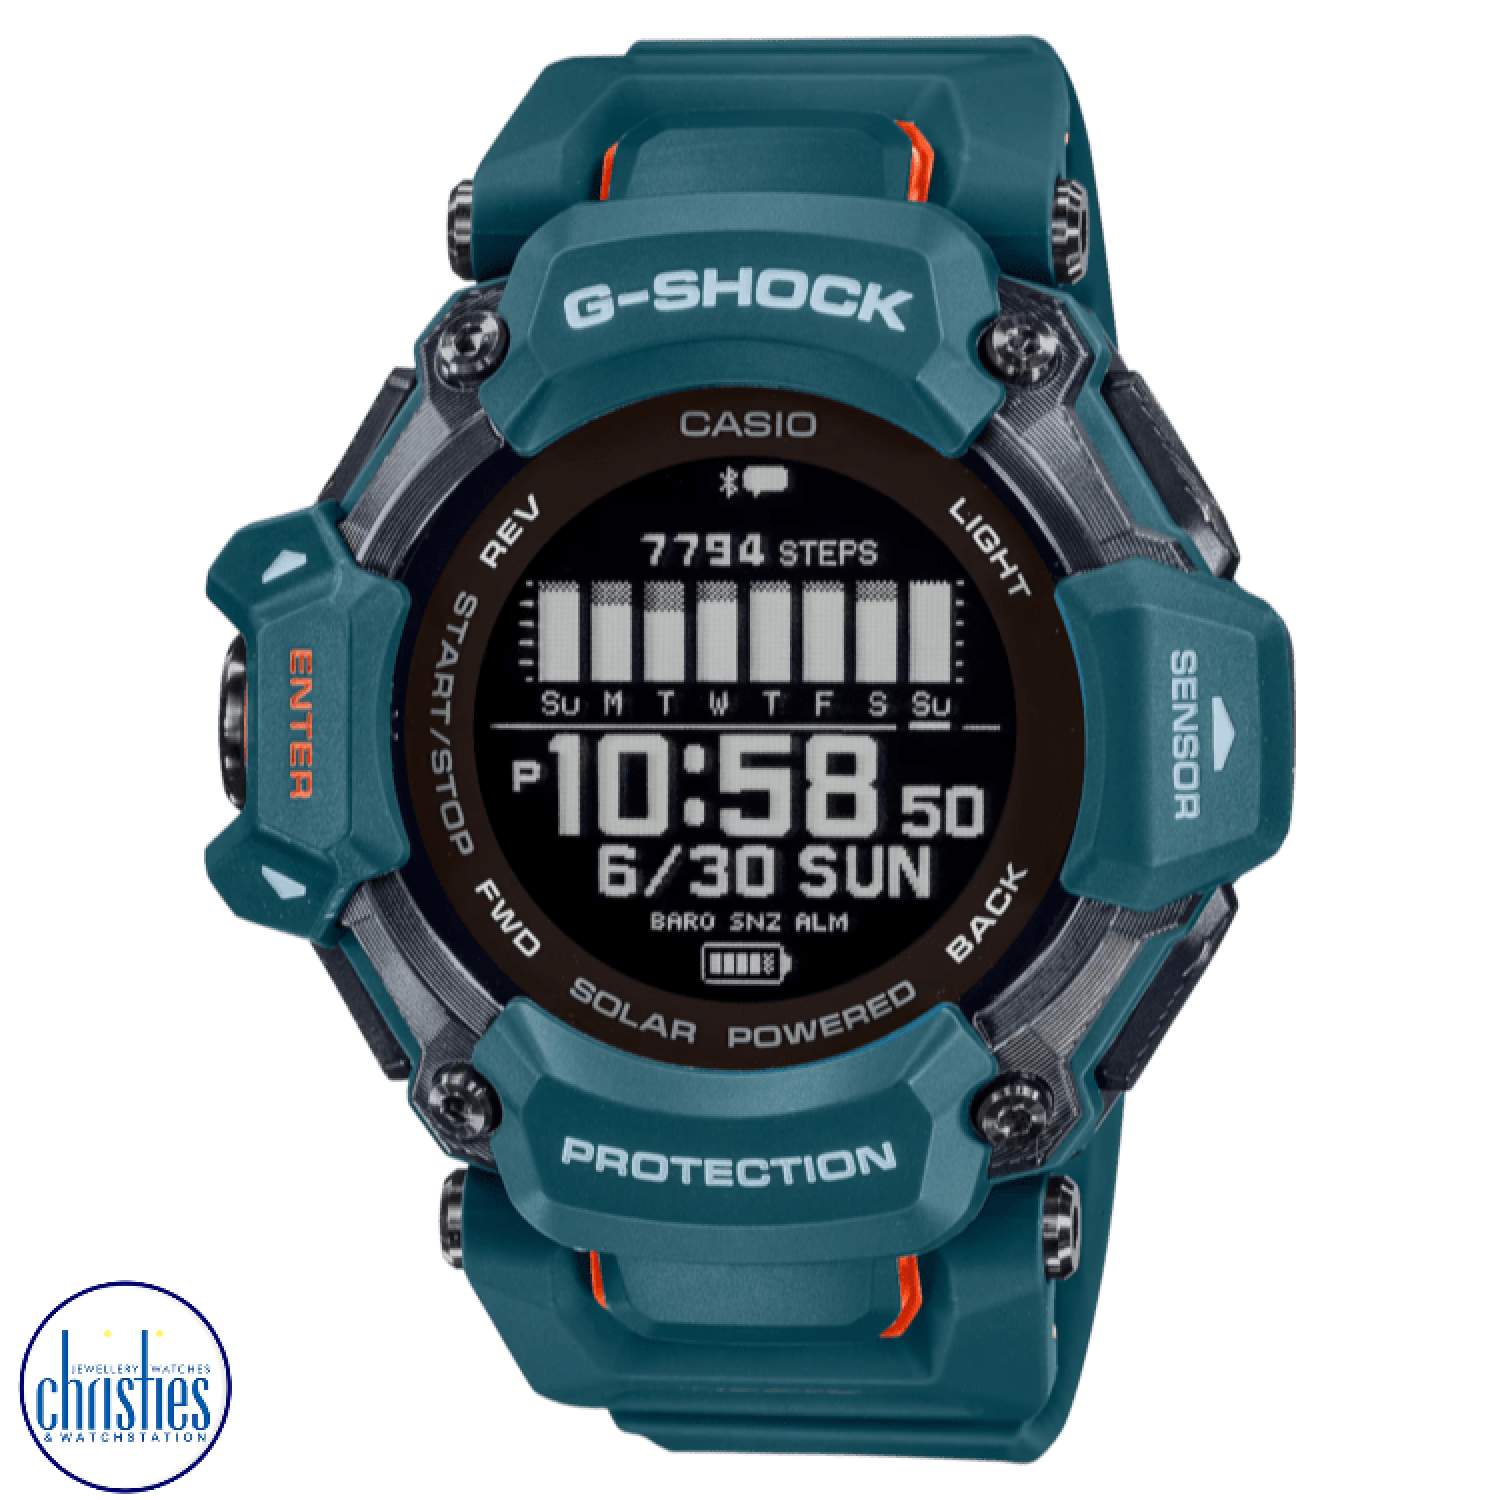 GBDH2000-2 G-Shock G-SQUAD GPS Sports Watch .Elevate Your Training Game with Casio G-Shock Multi-Sport Watch